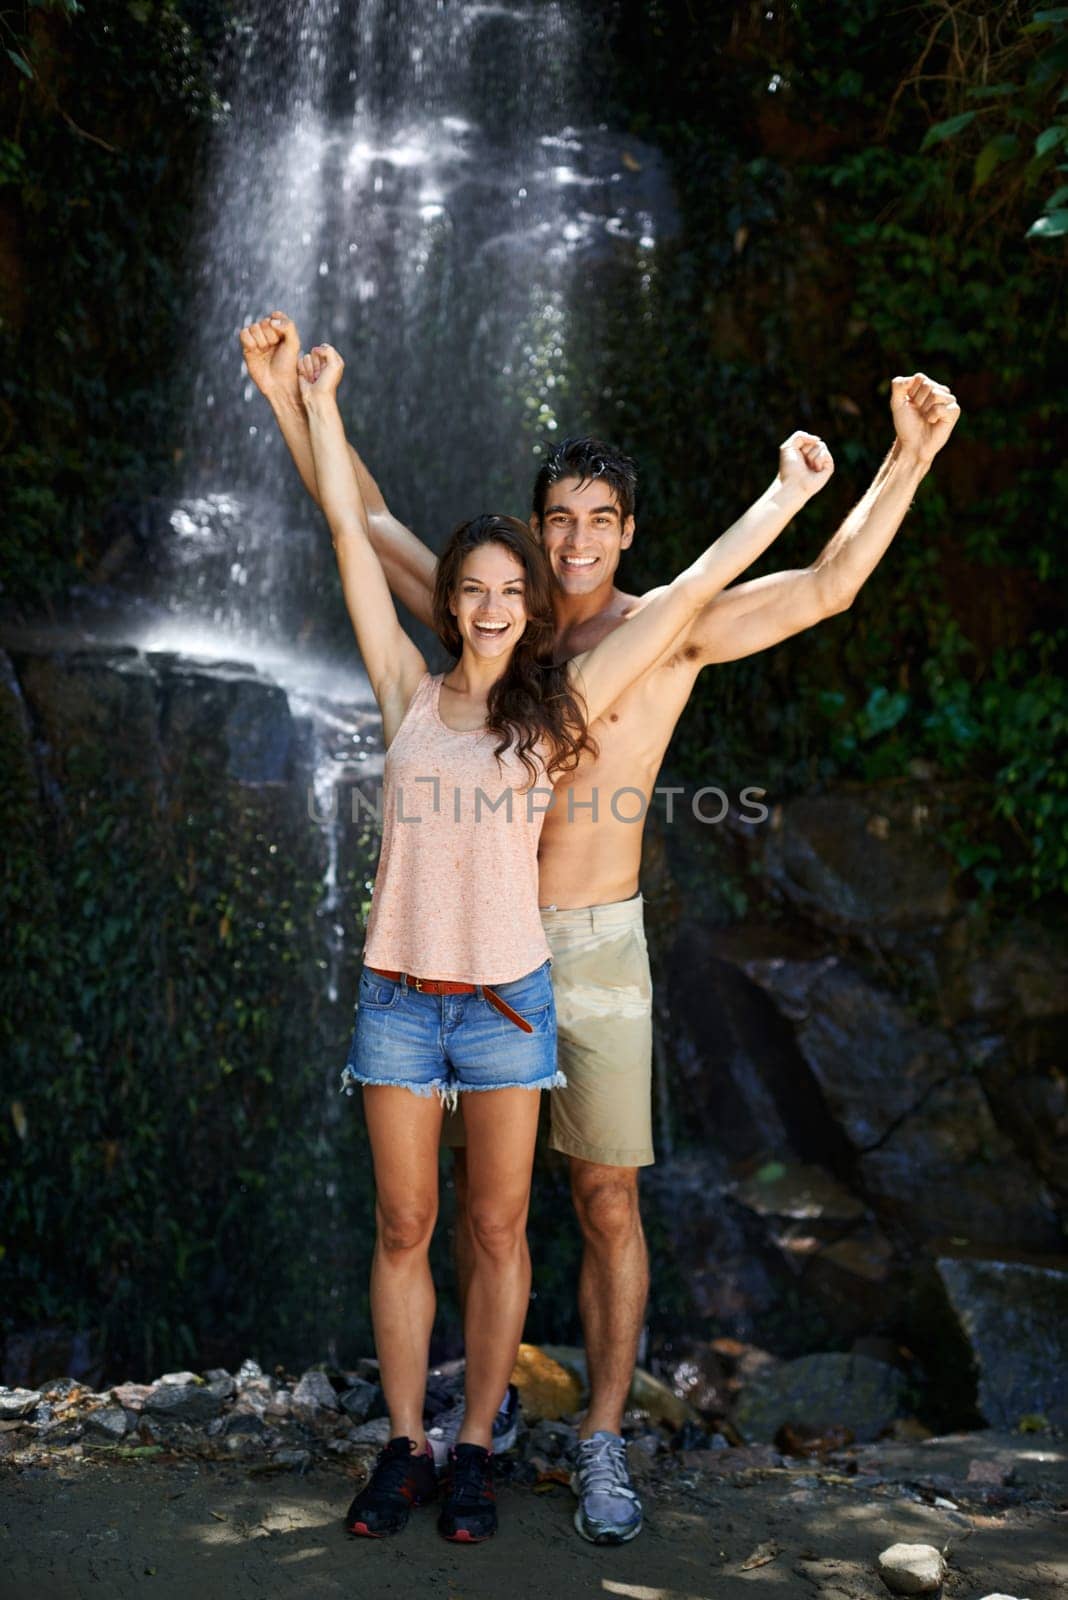 Success, waterfall or portrait of happy couple in nature or journey on outdoor trekking adventure. Excited, victory or proud people cheering on holiday vacation for exercise goals, travel or wellness.